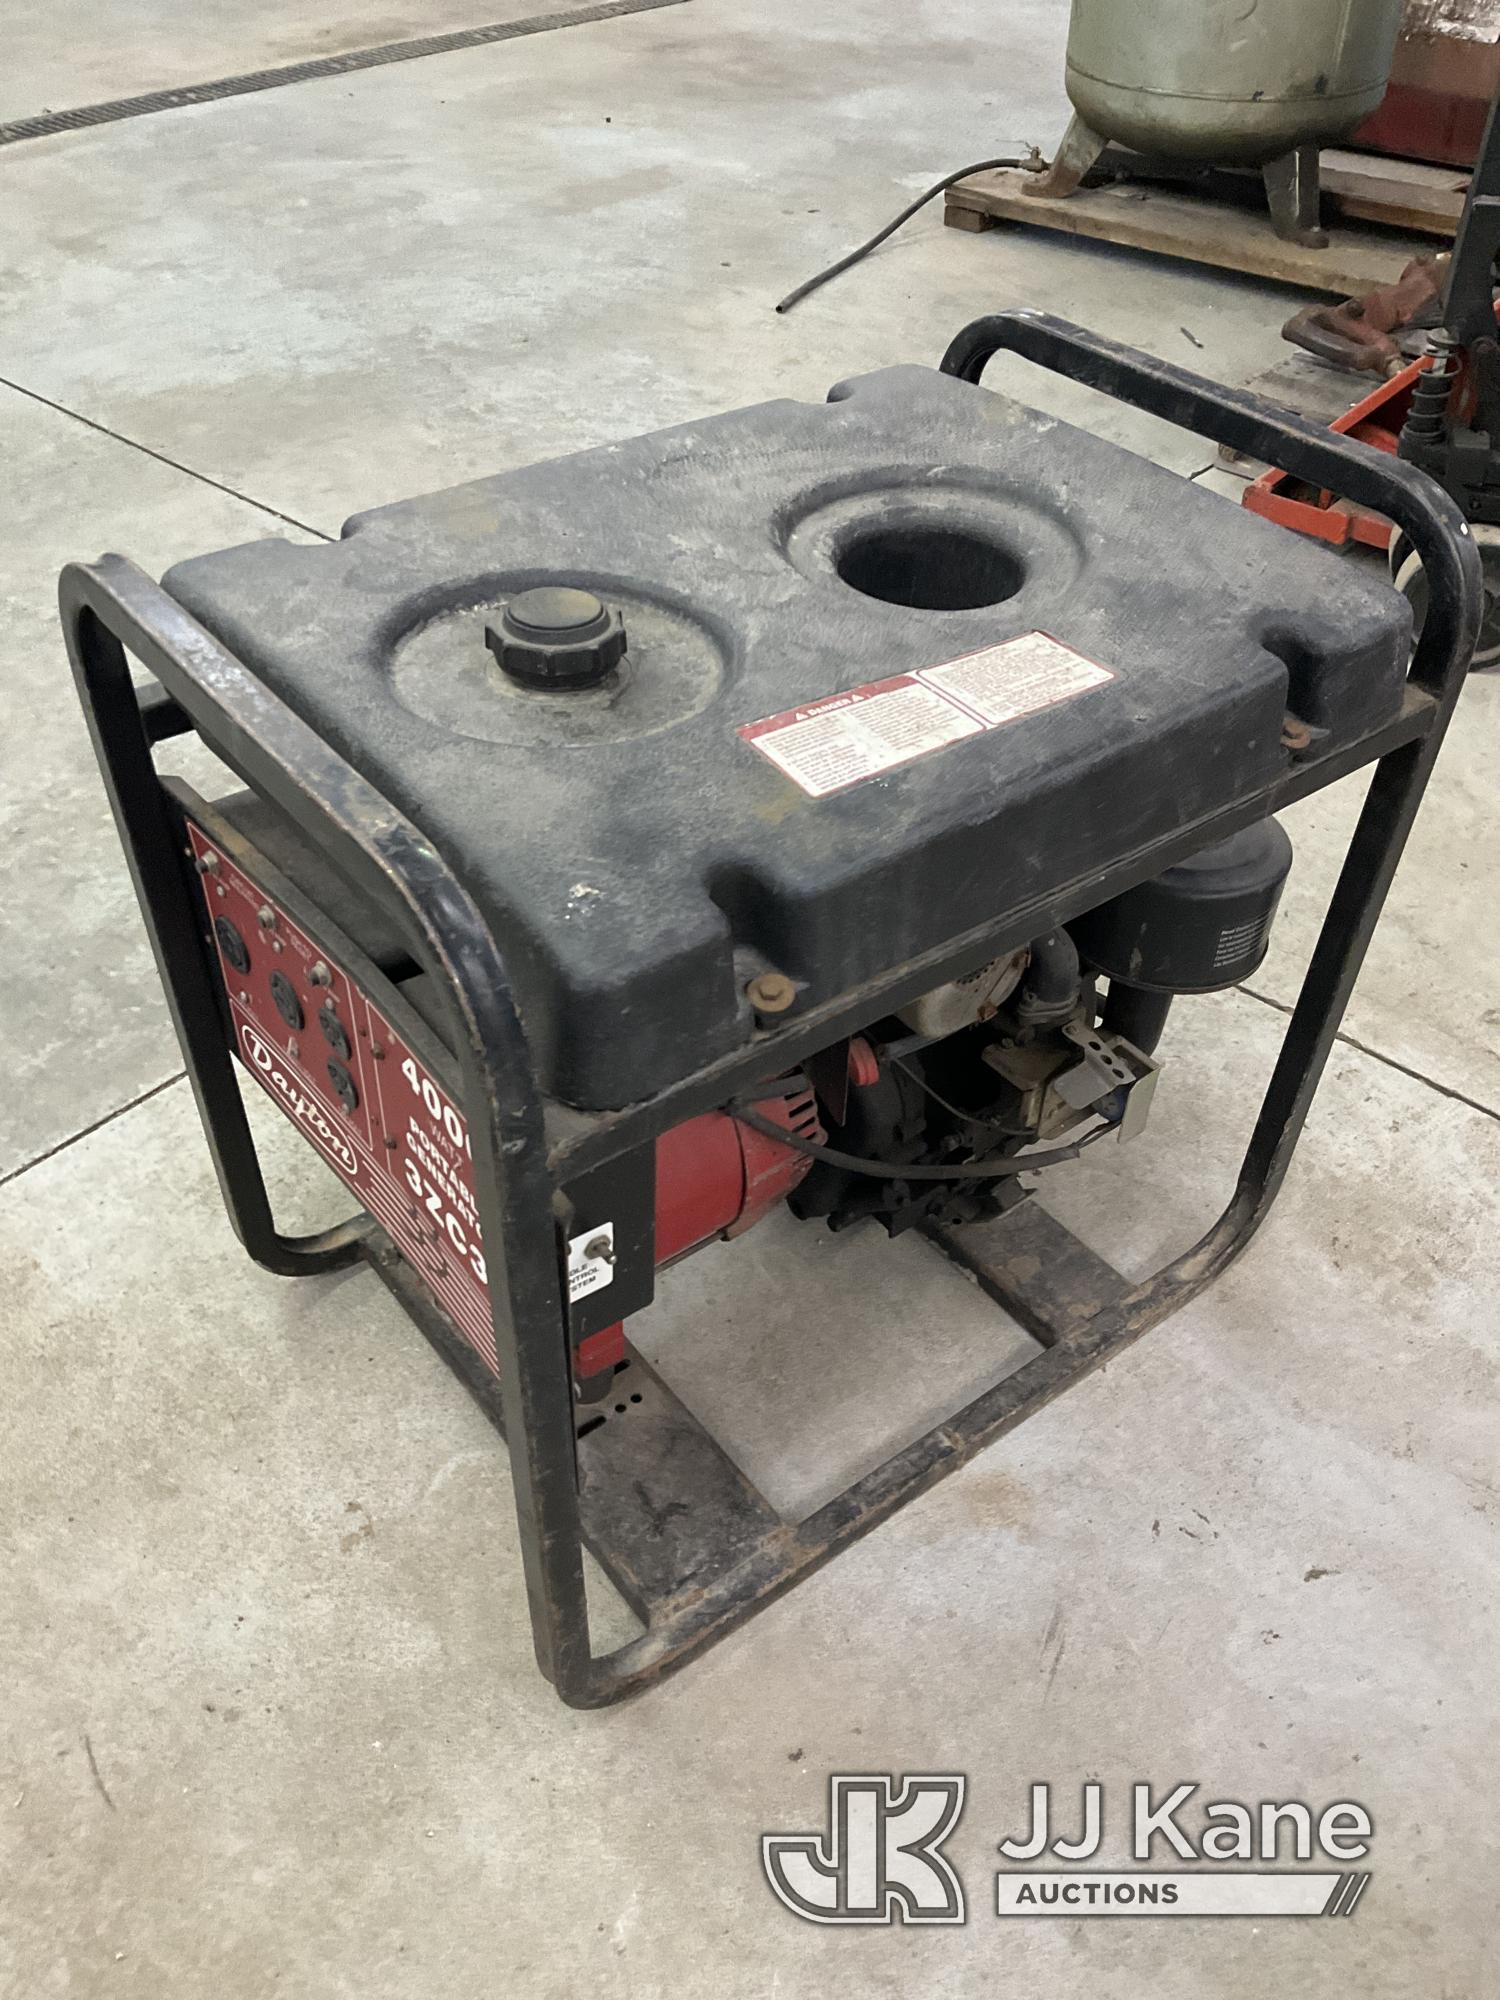 (South Beloit, IL) Dayton Portable Generator Conditions Unknown, Pull Cord Clutch Broke While Trying